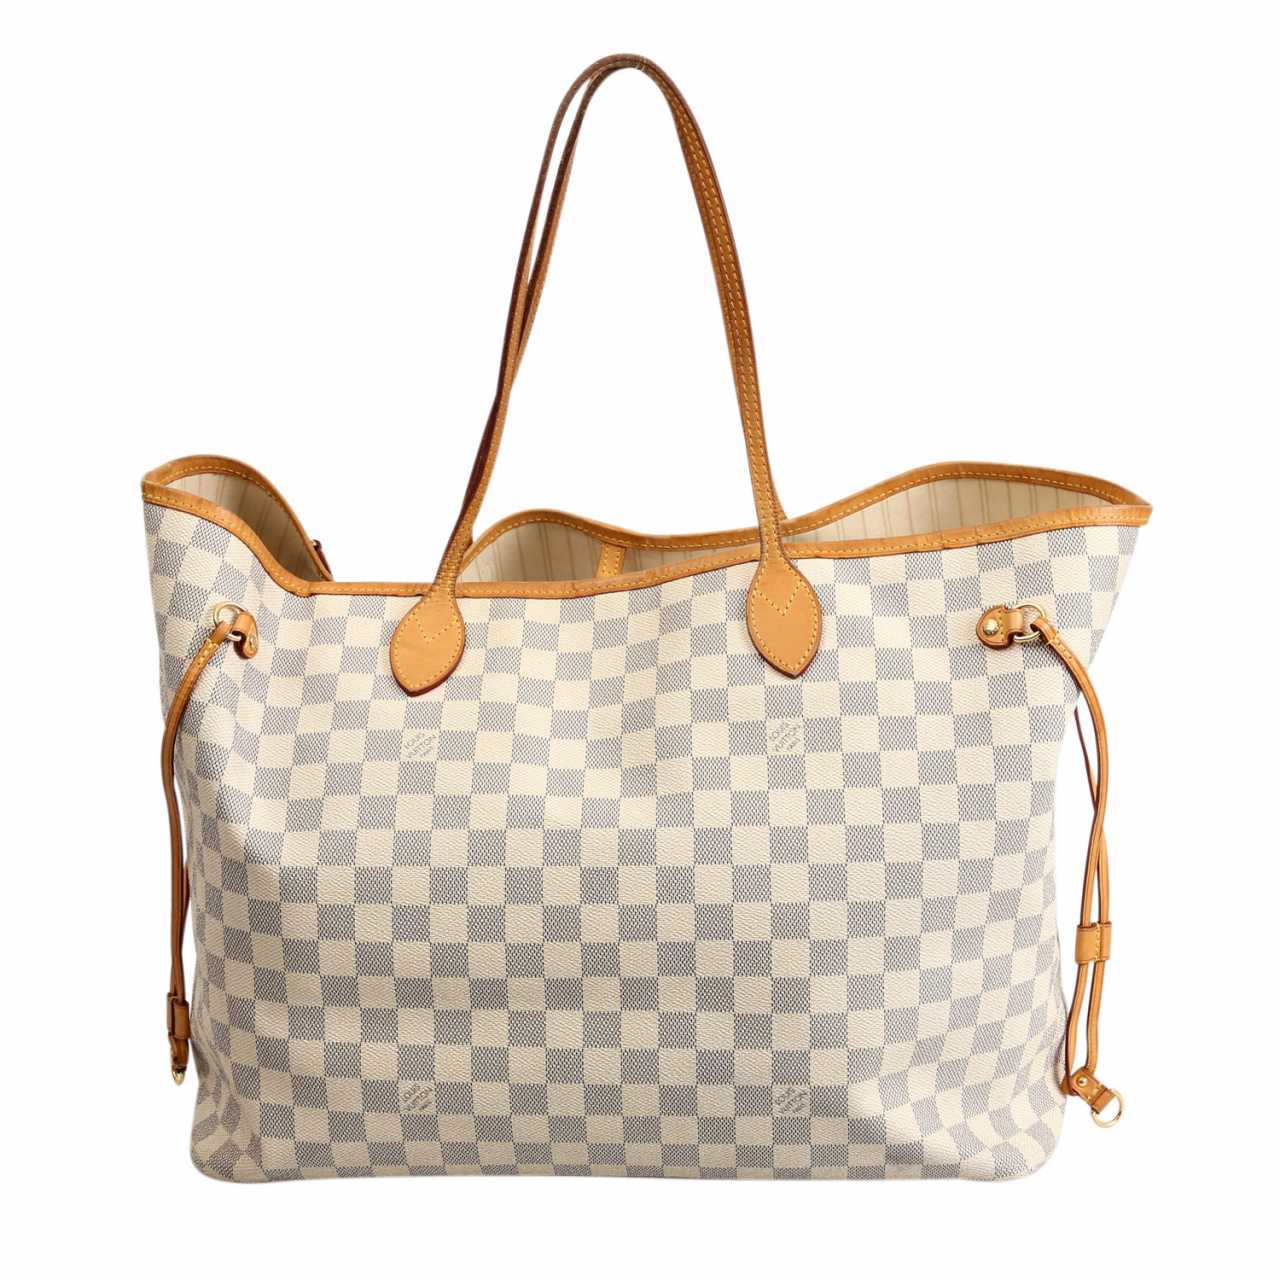 LOUIS VUITTON Shopper GM", Kollektion 2014. for sale — buy online: auction VERYIMPORTANTLOT. Auction catalog "Eppli in Royal Blue" from 12.01.2019: photo, price auction 97